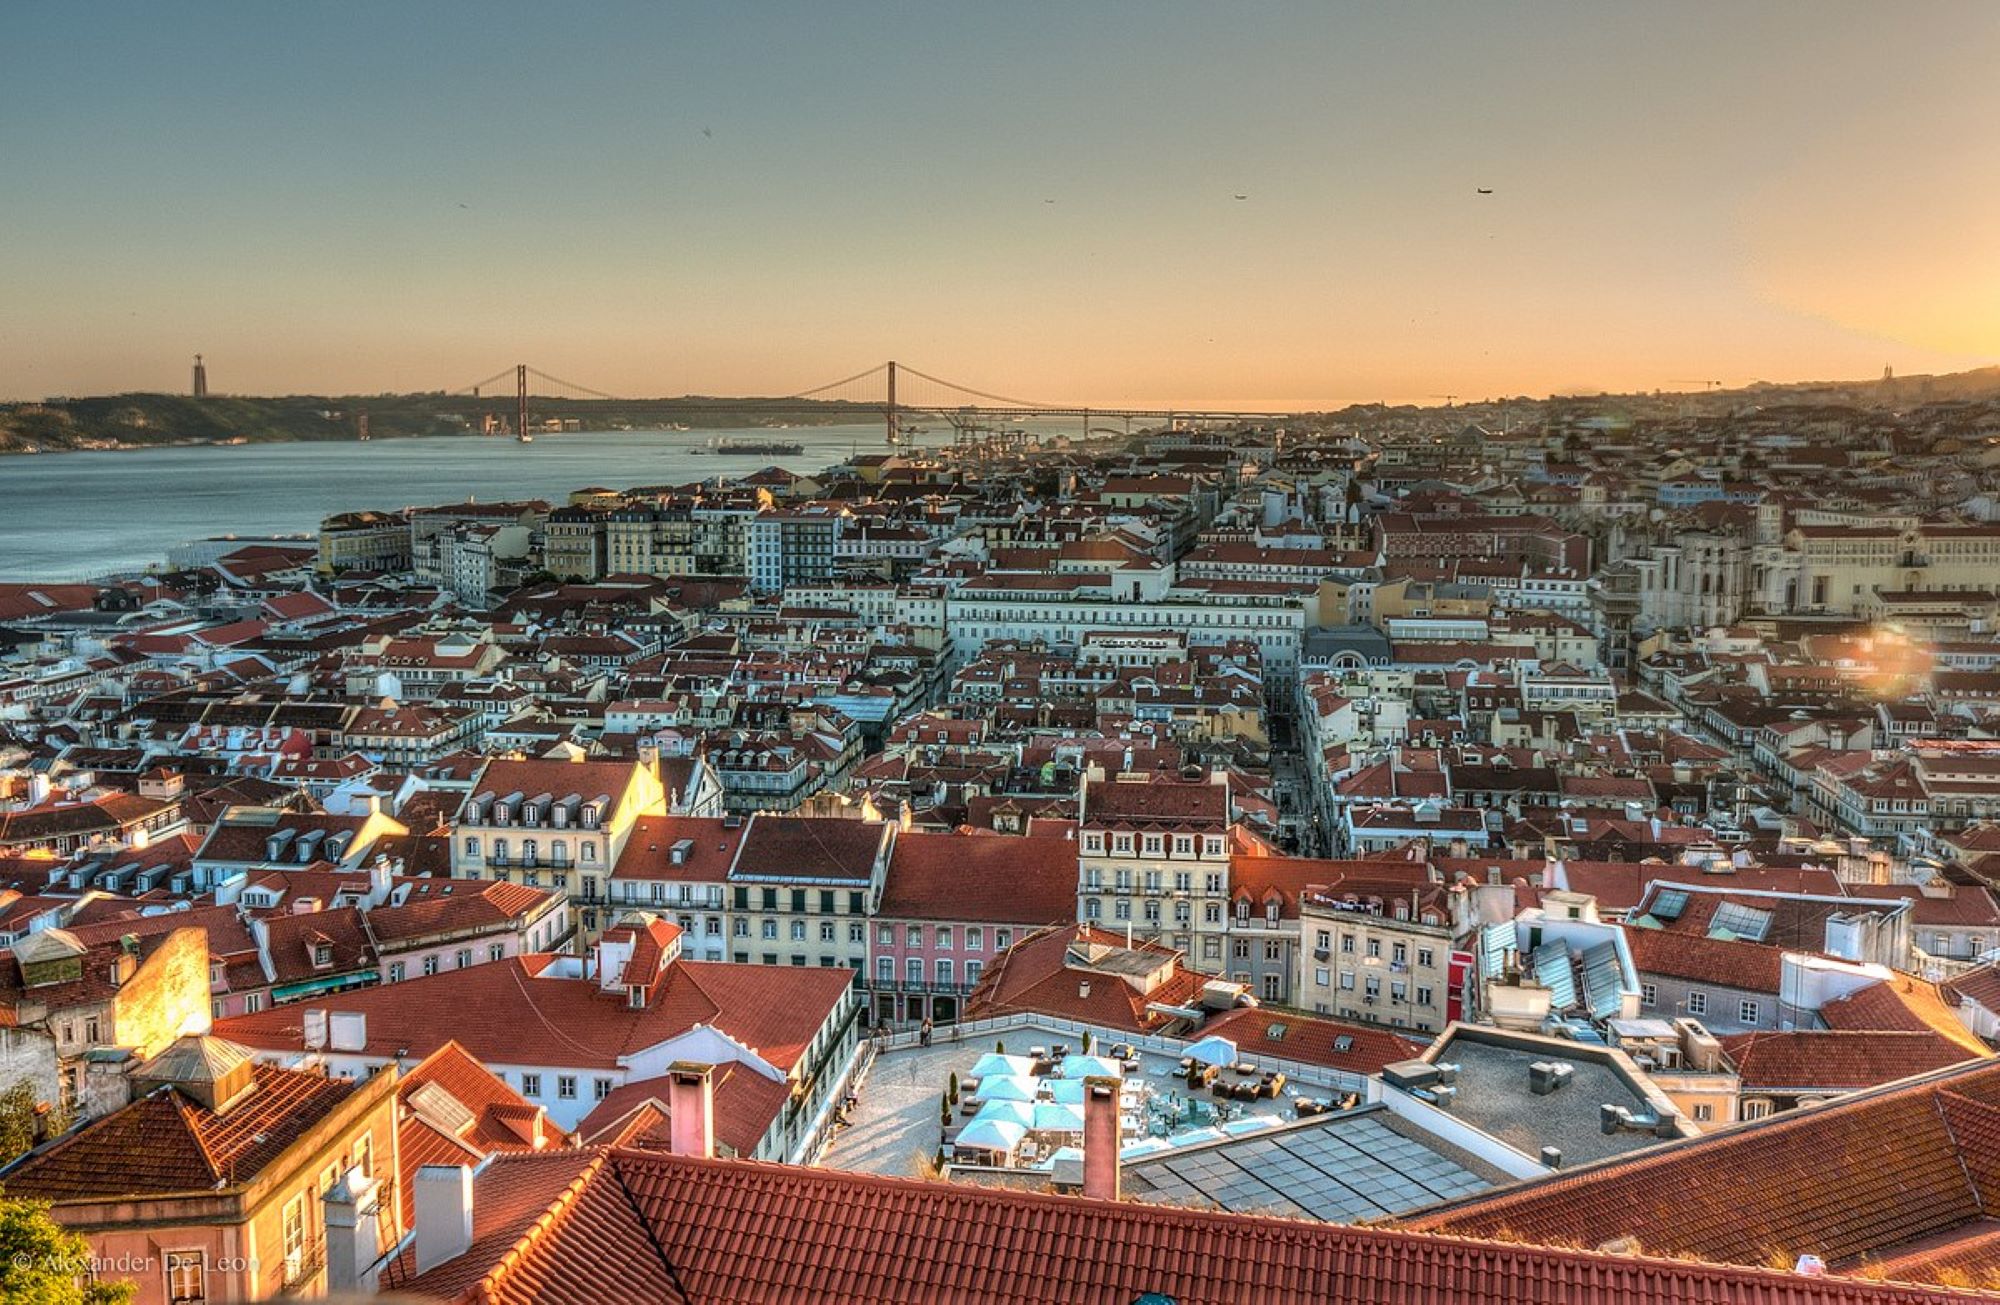 Sunset over river tagua and red bridge in Lisboa, city seen from above, red tiles rooftops and typical houses.